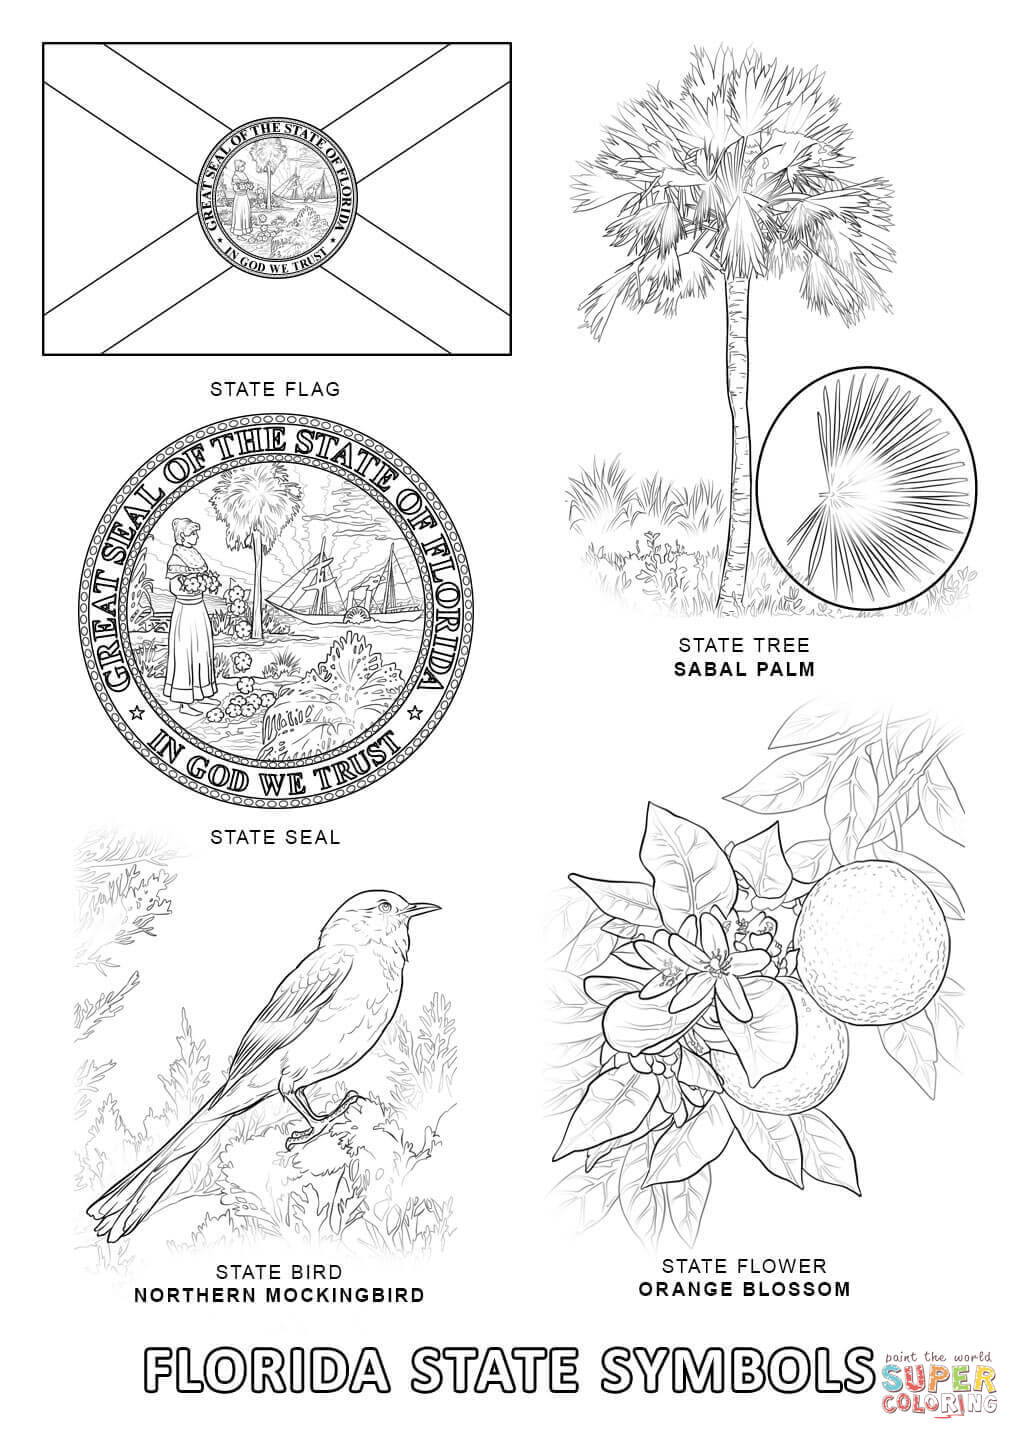 Florida State Symbols coloring page | Free Printable Coloring Pages